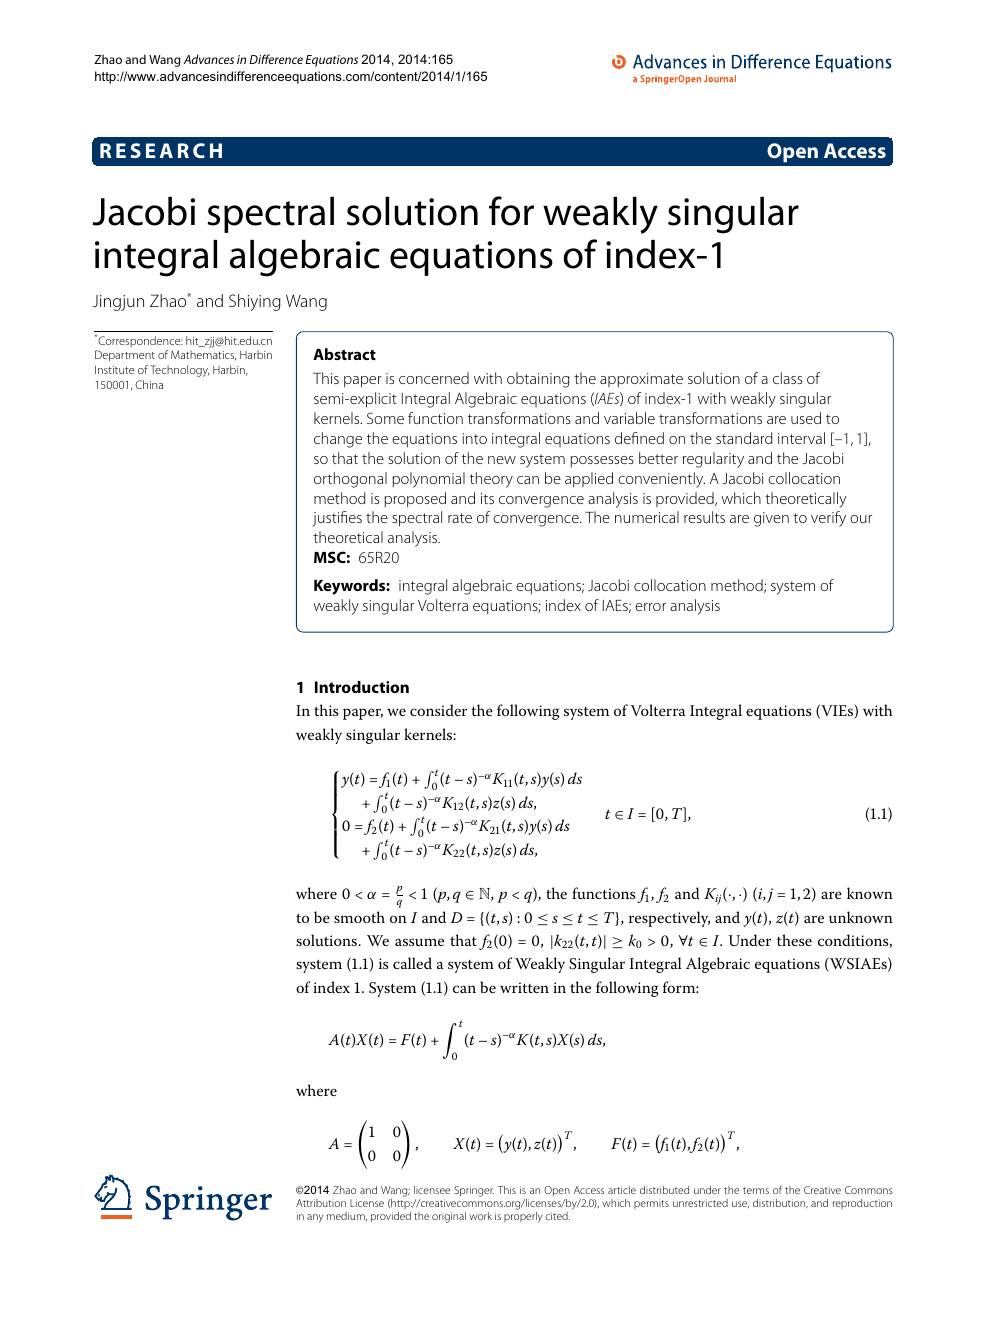 Jacobi Spectral Solution For Weakly Singular Integral Algebraic Equations Of Index 1 Topic Of Research Paper In Mathematics Download Scholarly Article Pdf And Read For Free On Cyberleninka Open Science Hub